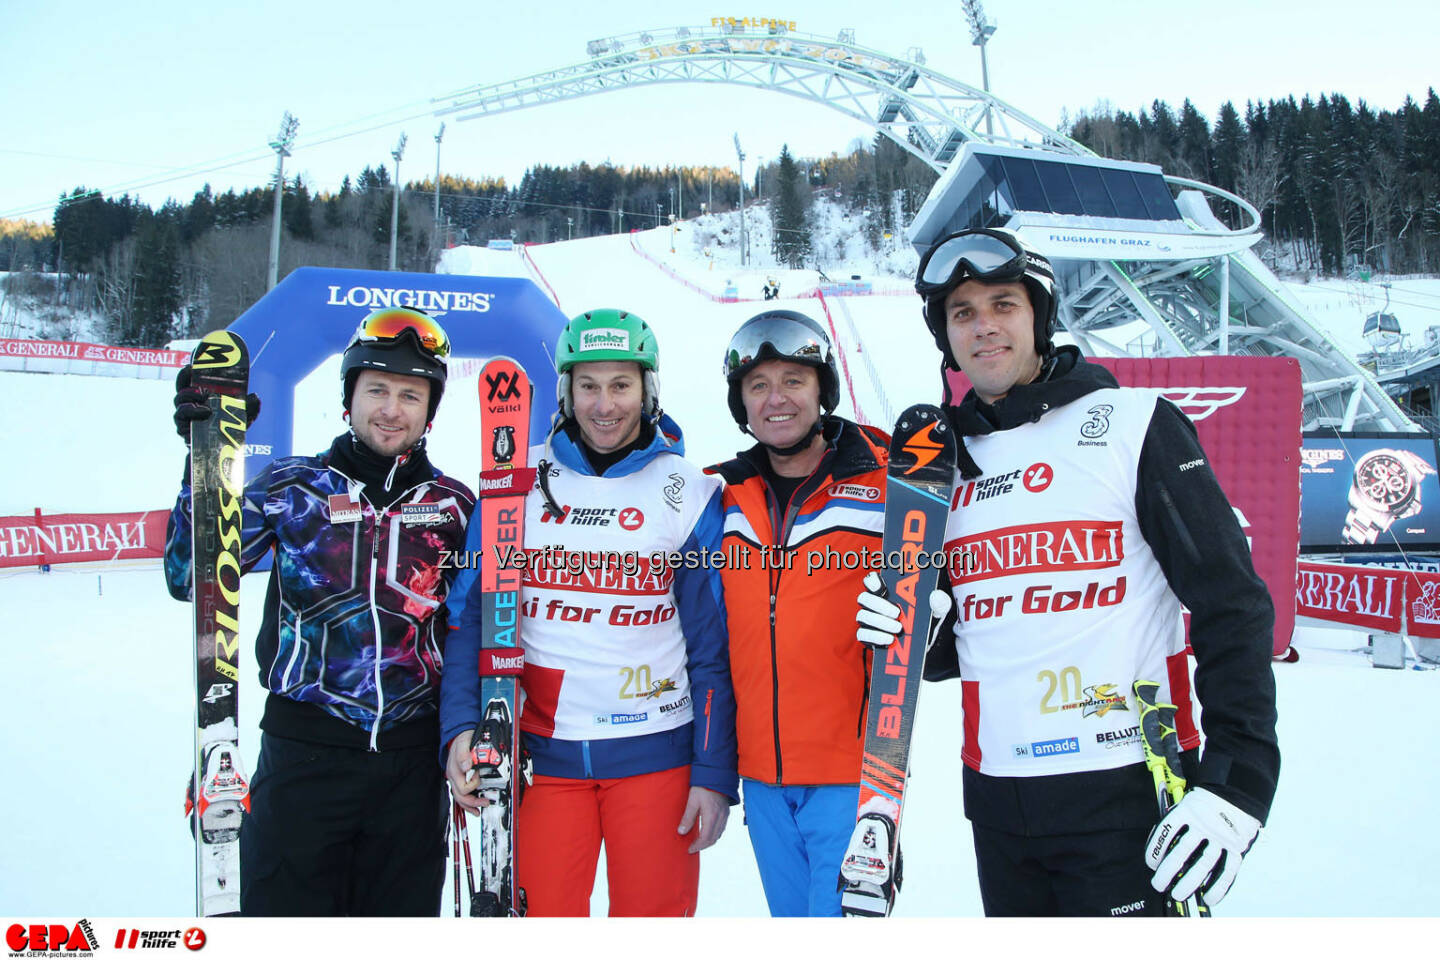 Ski for Gold Charity Race. Image shows Reinfried Herbst, Manfred Pranger, managing director Harald Bauer (Sporthilfe) and Mario Matt.
Photo: GEPA pictures/ Harald Steiner